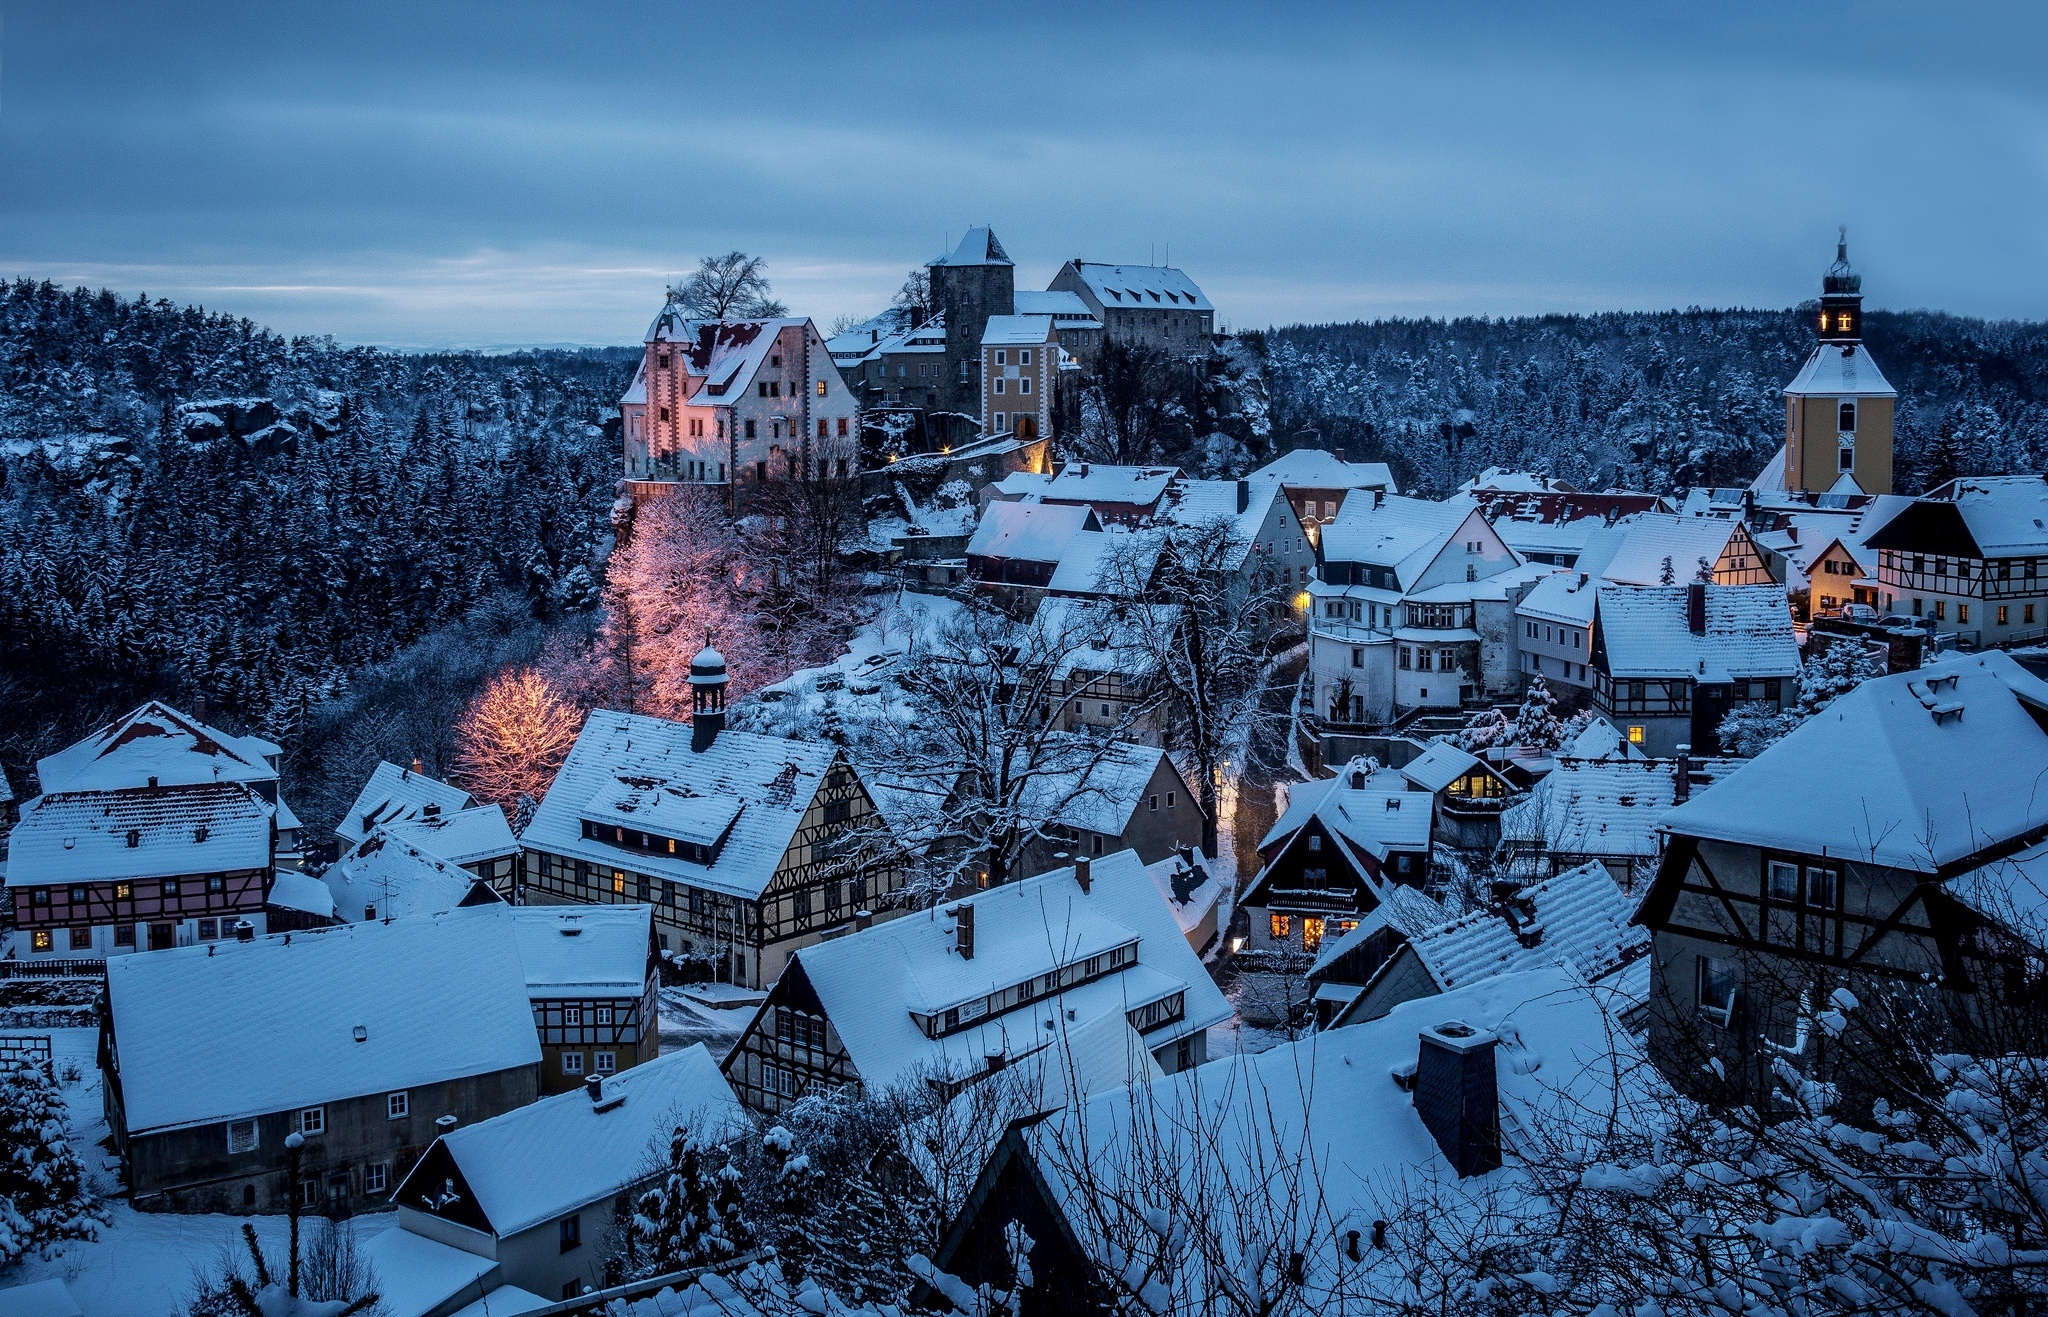 General 2048x1317 snow trees forest town house Hohnstein Germany castle rooftops lights evening idyllic